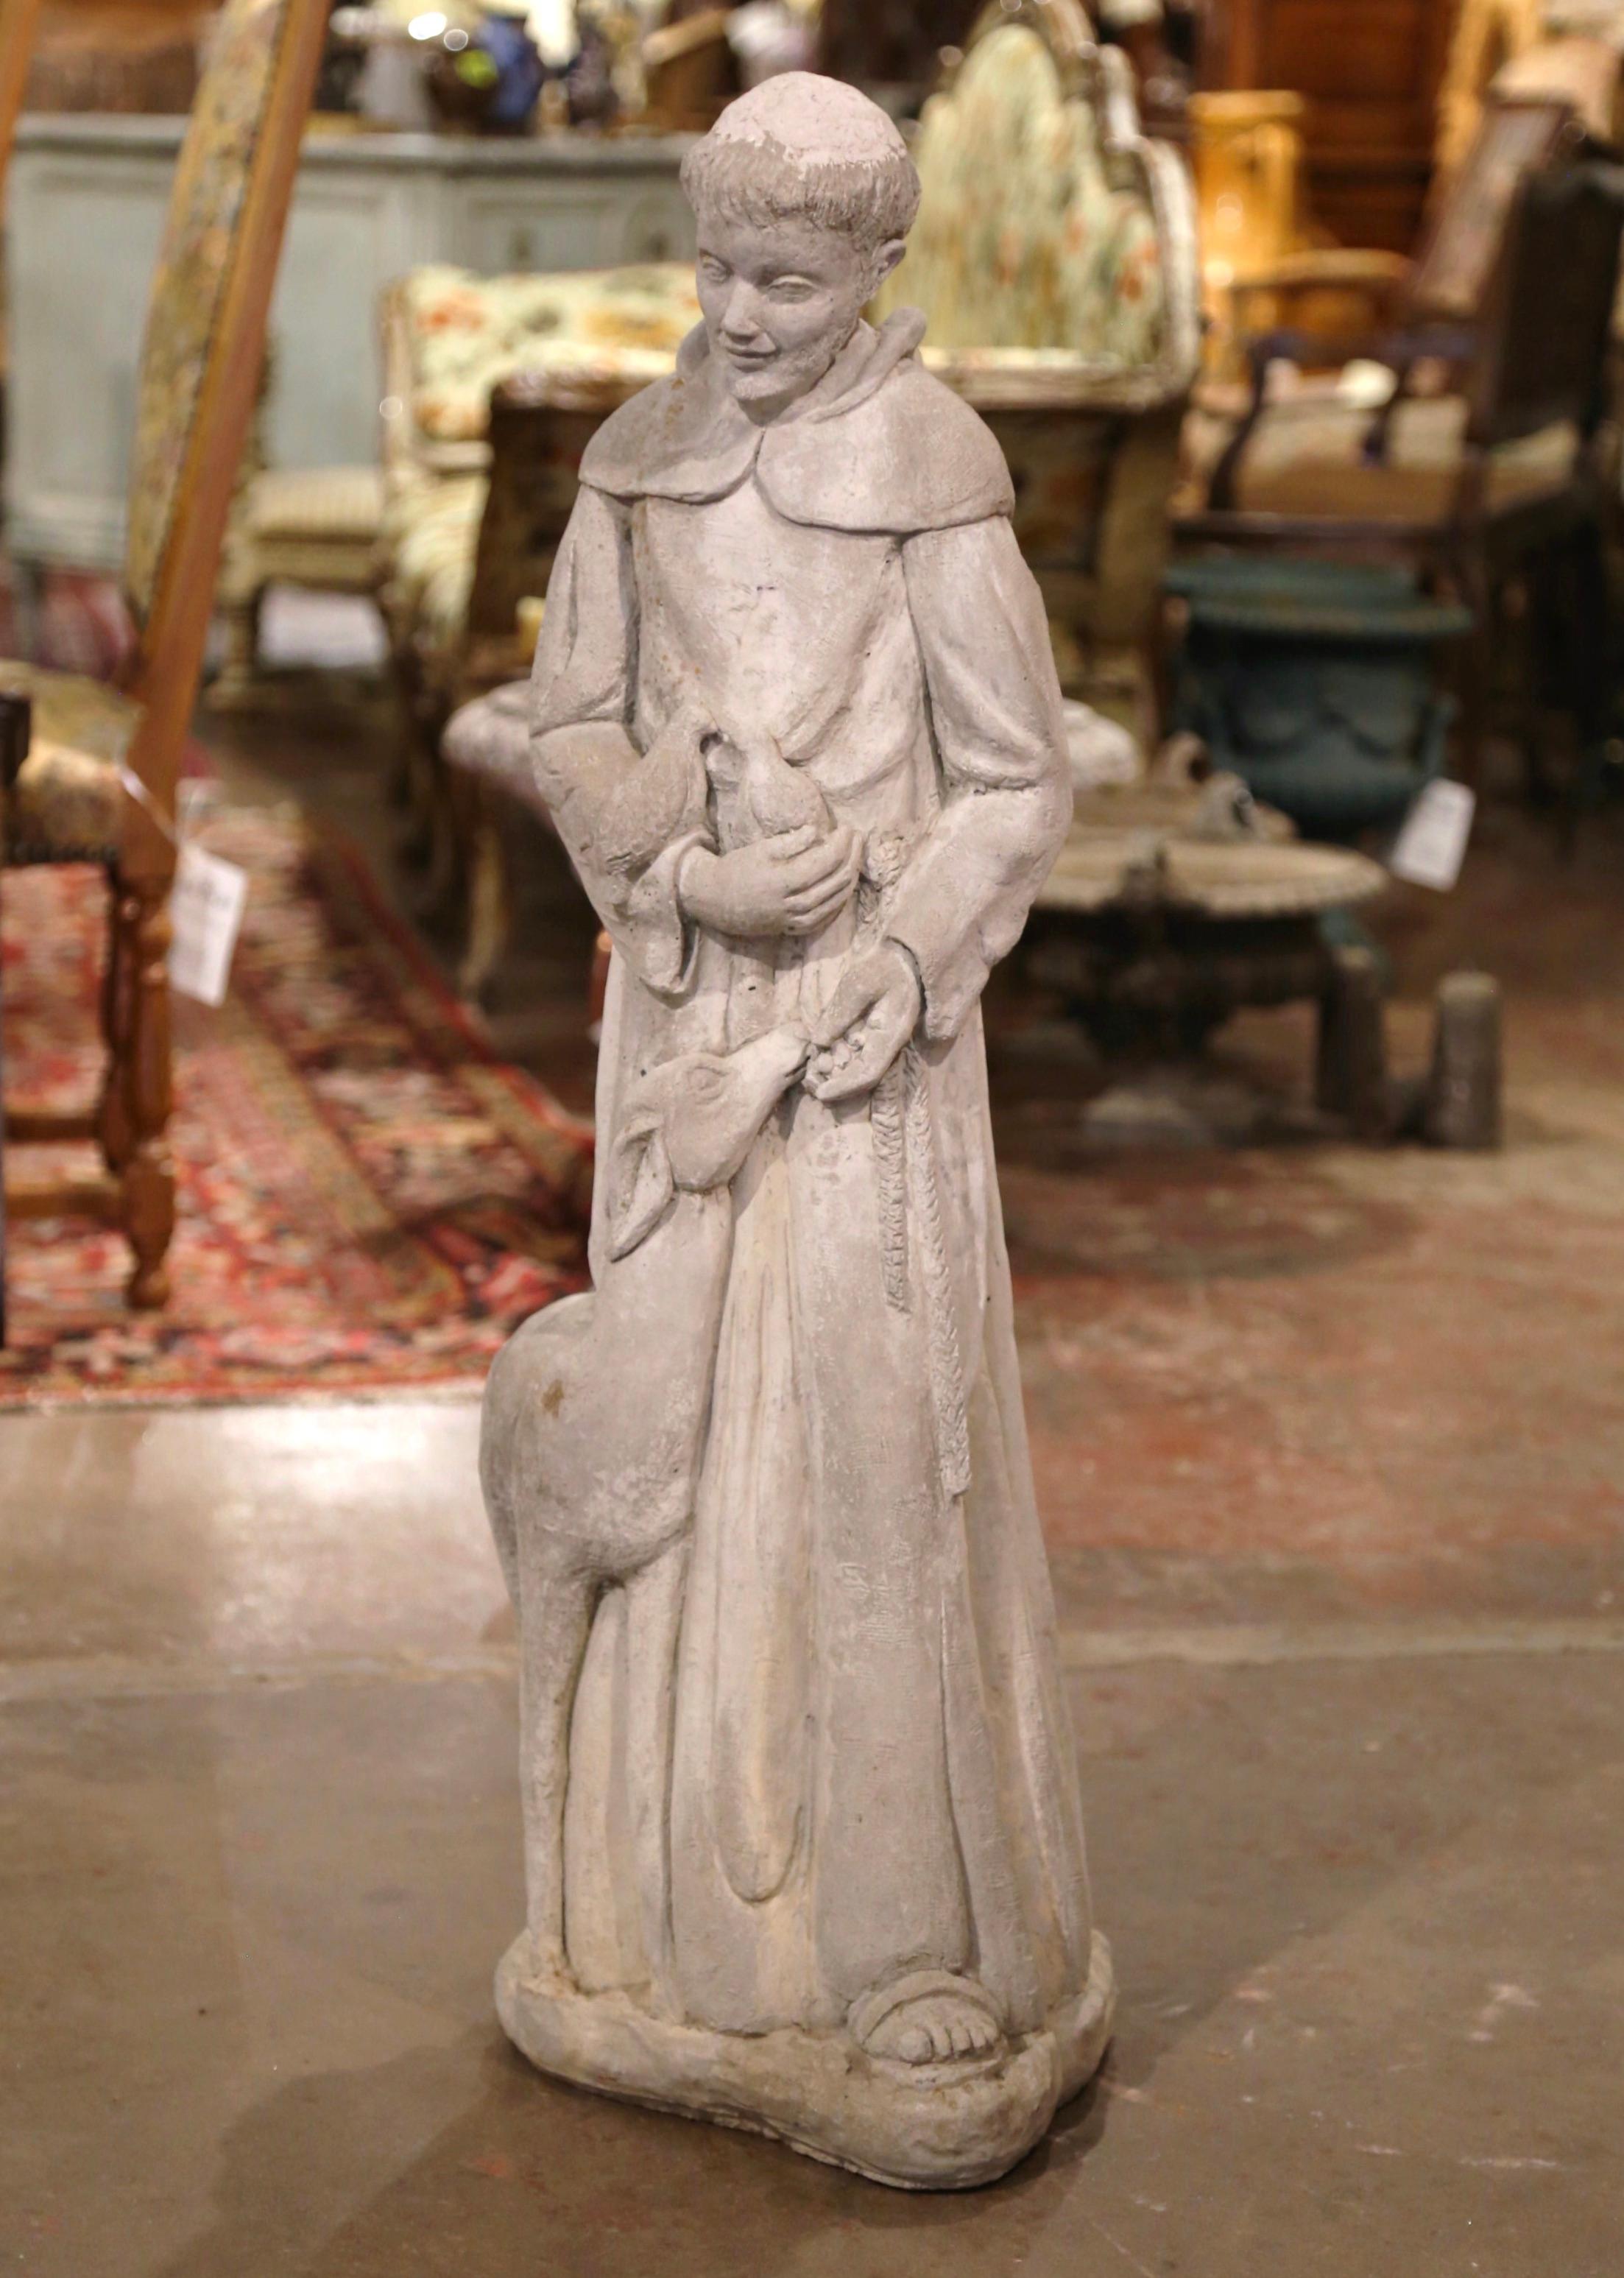 Decorate an outdoor garden with this antique statue featuring Saint Francis, the saint patron of animals. Crafted in France, the carved vintage statue depicts the Saint dressed in cassock, holding two birds in one hand while feeding a lamb with the